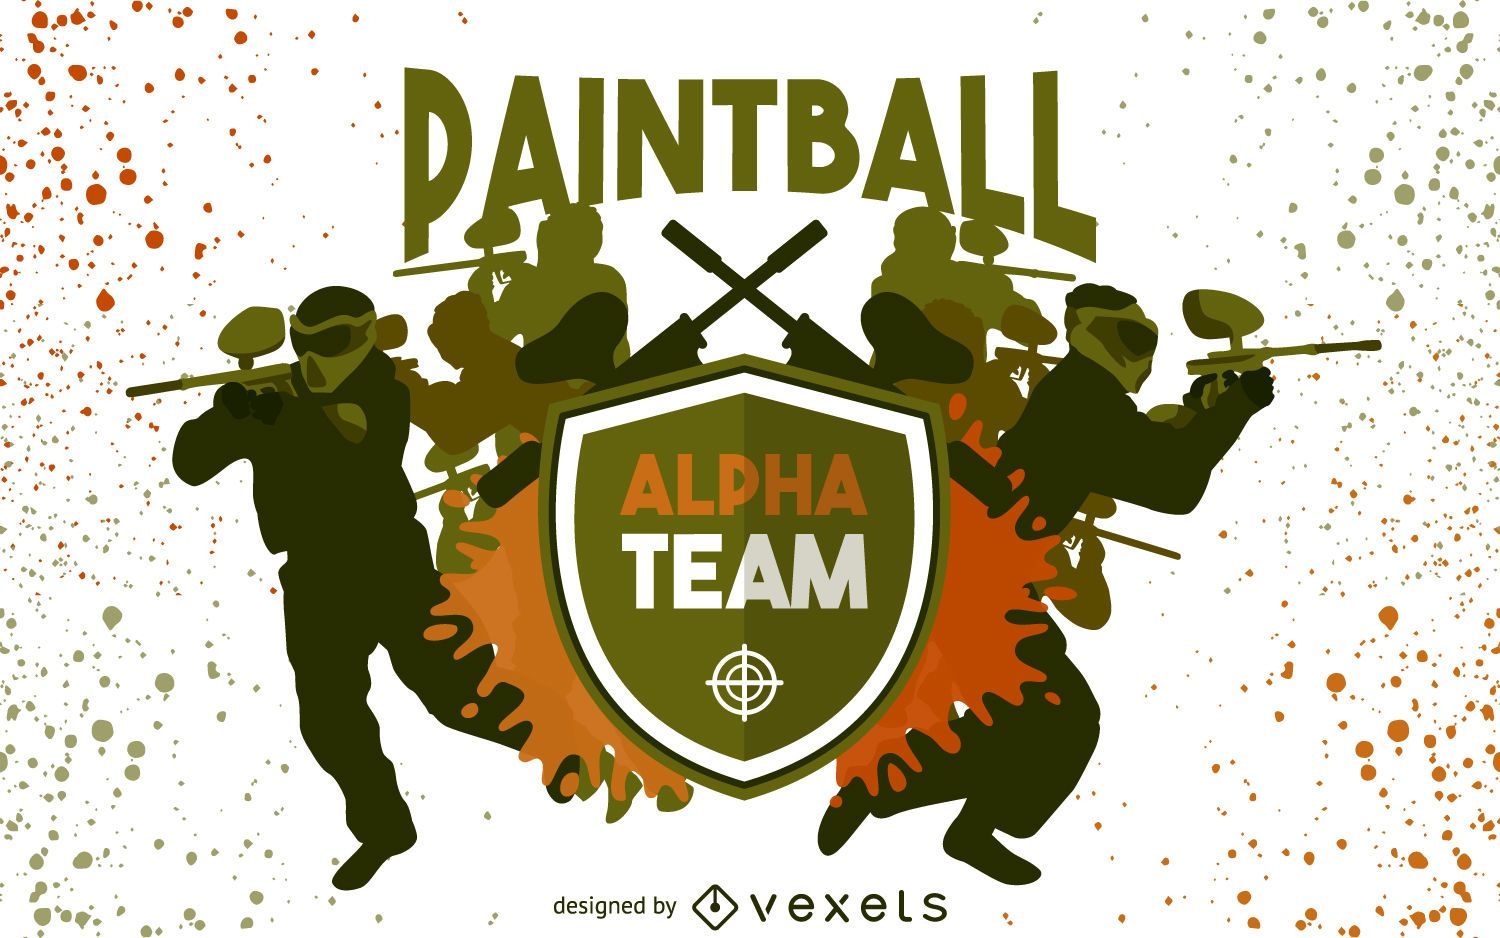 Paintball team silhouettes